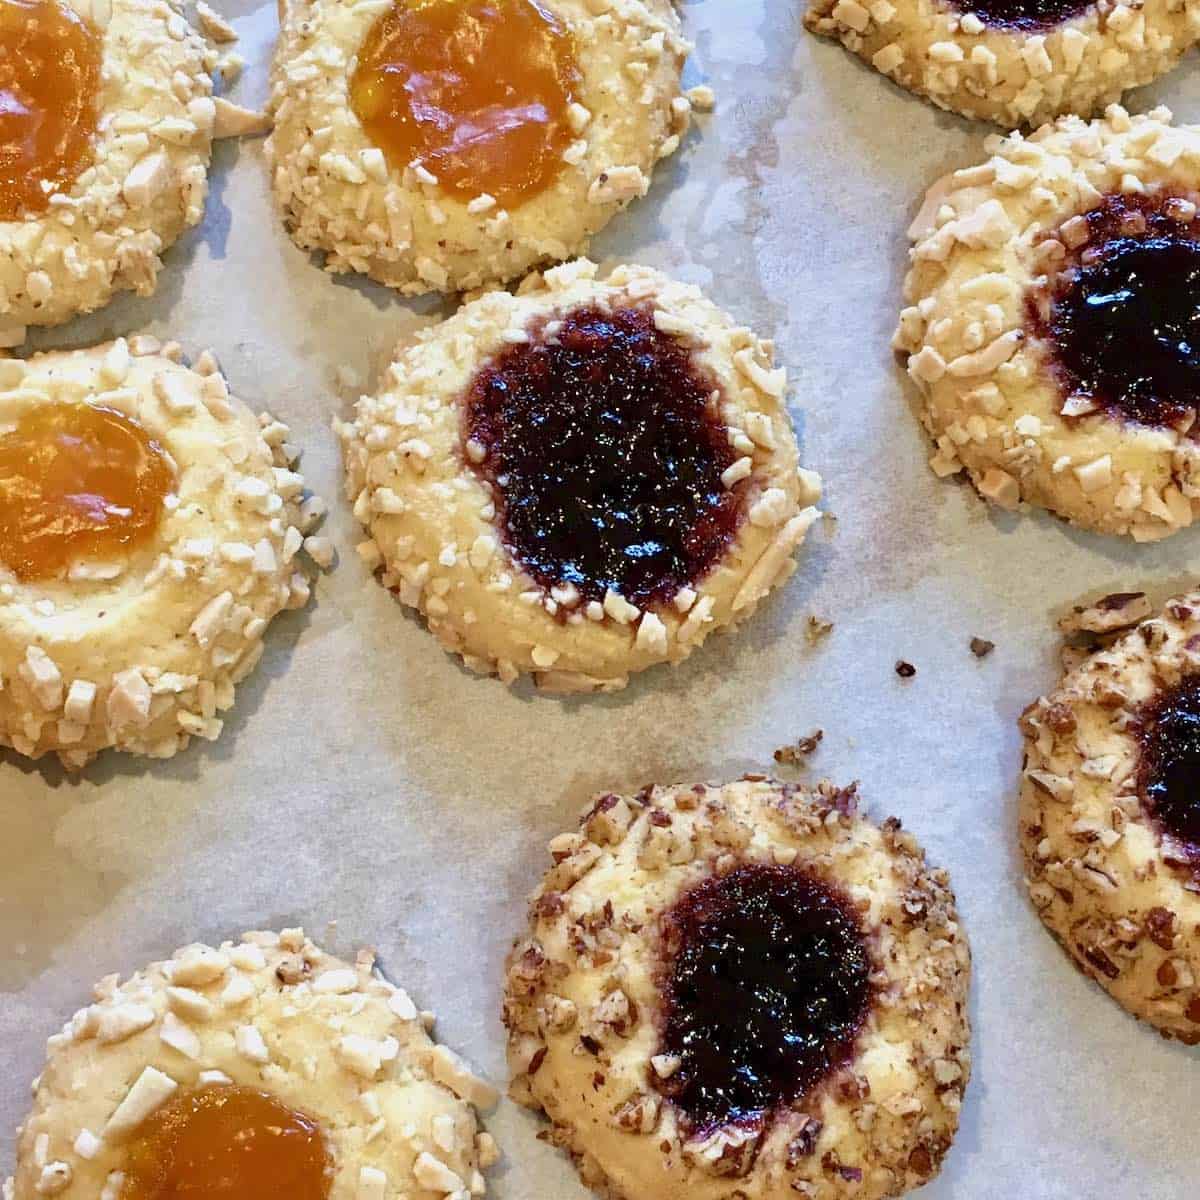 Thumbprint jelly cookies on parchment paper.